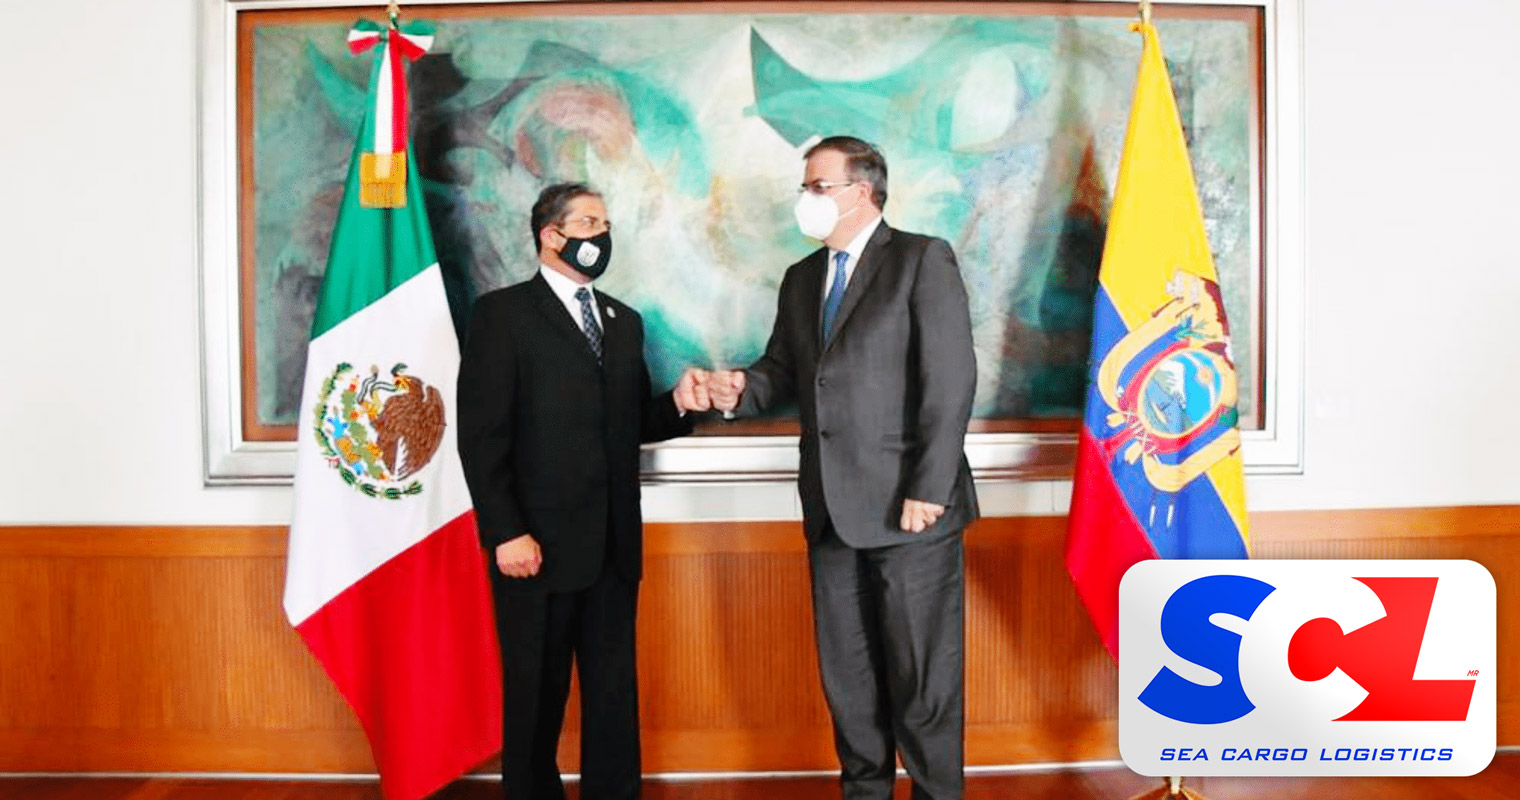 Sea Cargo Logistics Shared the News about the New Commercial Alliance between Mexico and Ecuador